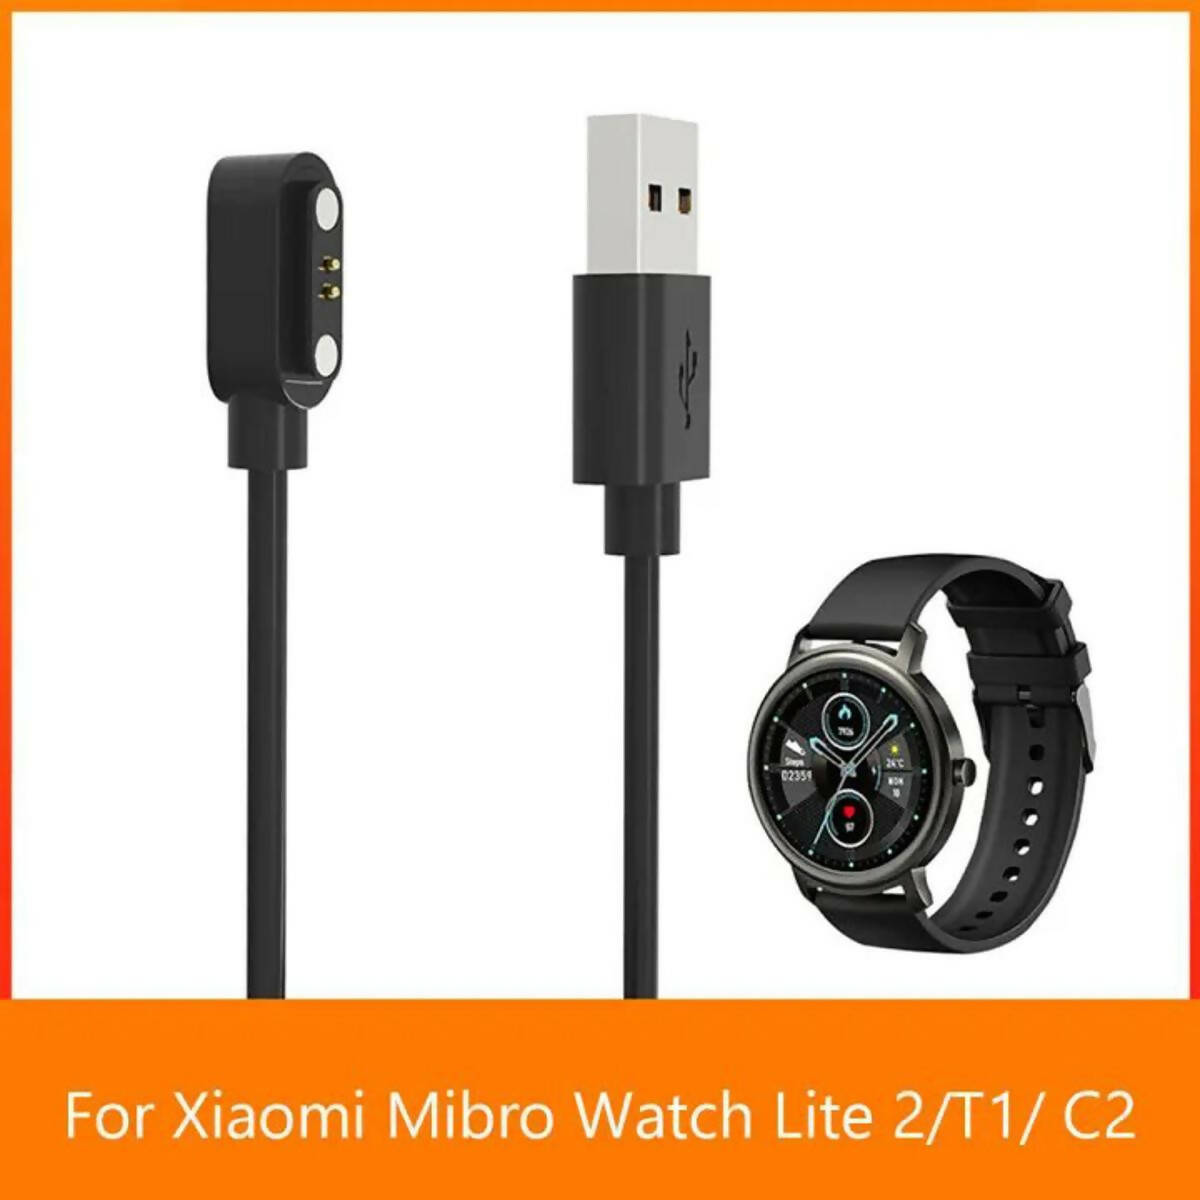 Mibro Watch Lite 2/t1 Usb Magnetic Charging Cable Smartwatch Charging Cable Smart Sports Watch